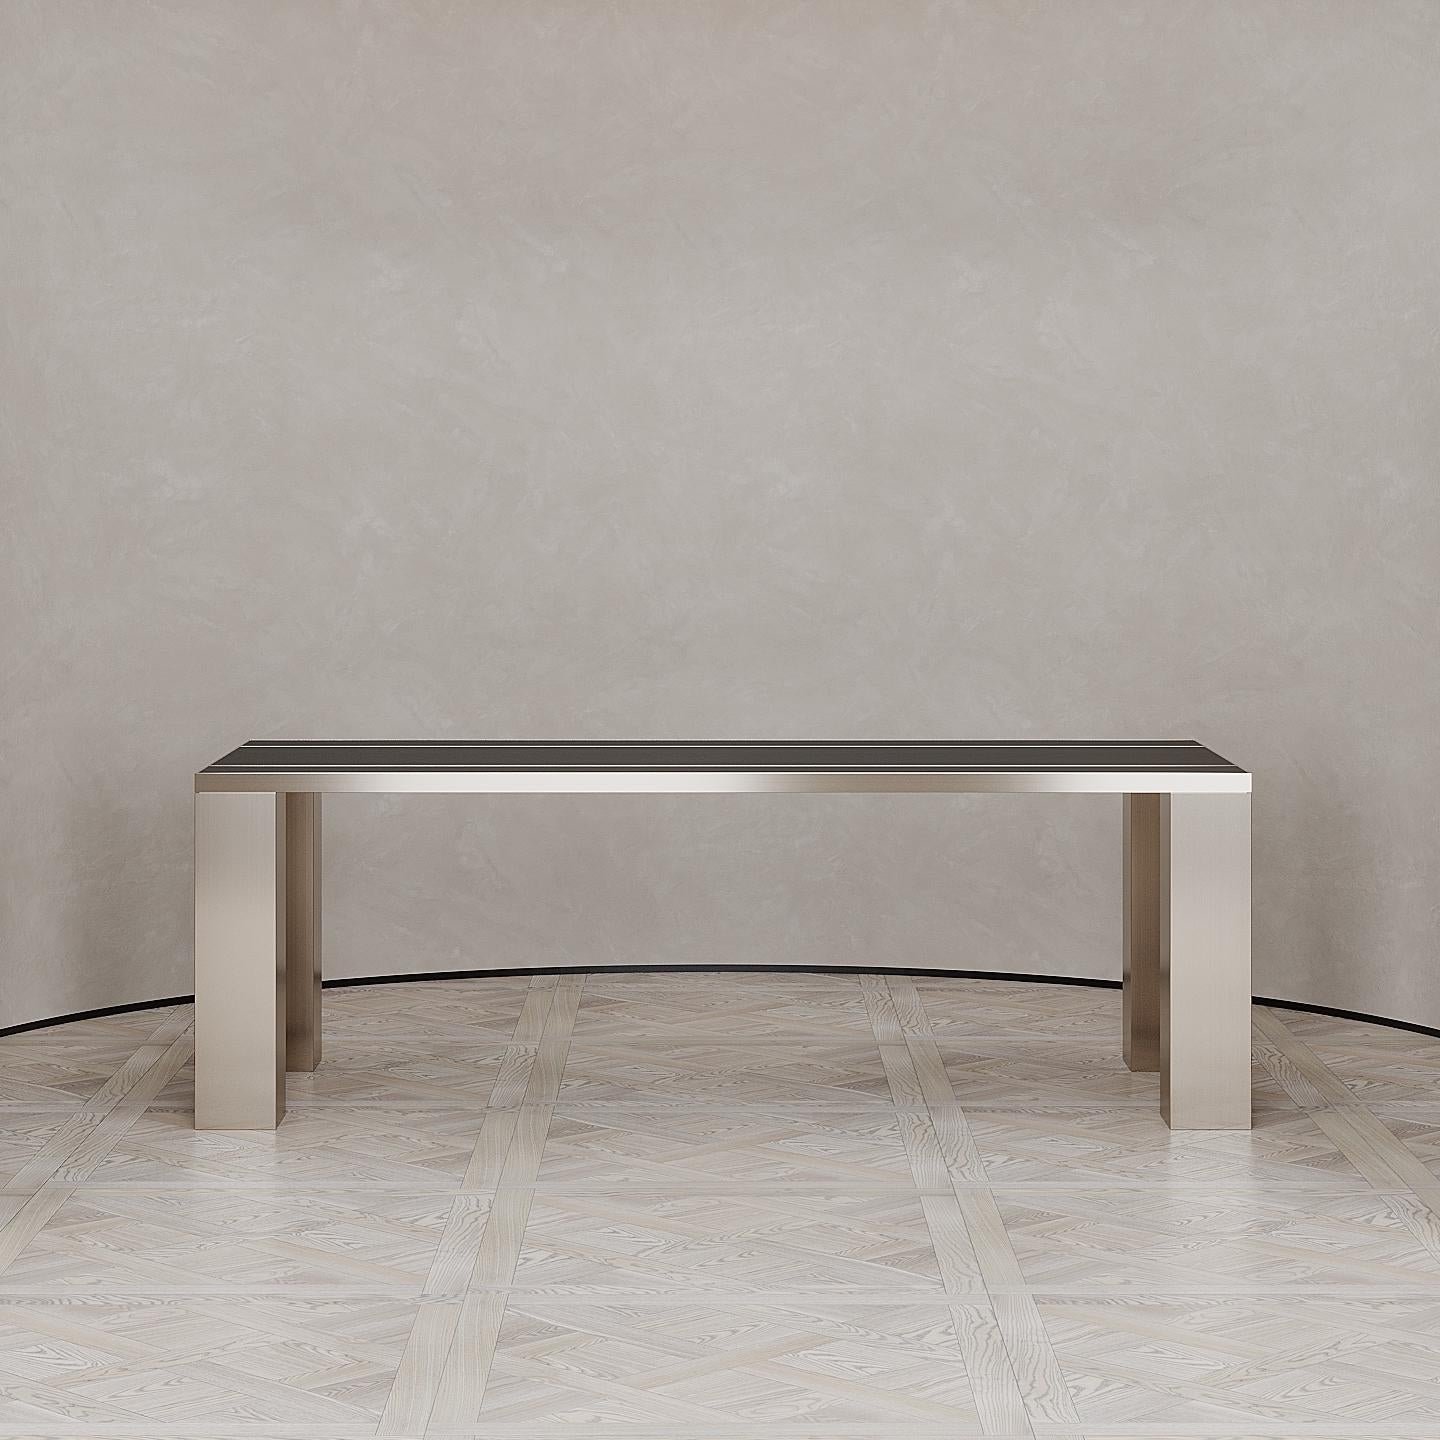 The Penumbra dining table is designed by Emél & Browne in the Minimalist and contemporary style and custom made in Italy by skilled artisans. The radiant copper legs of the Penumbra dining table emit a glowing sunset energy- bringing lightness to a